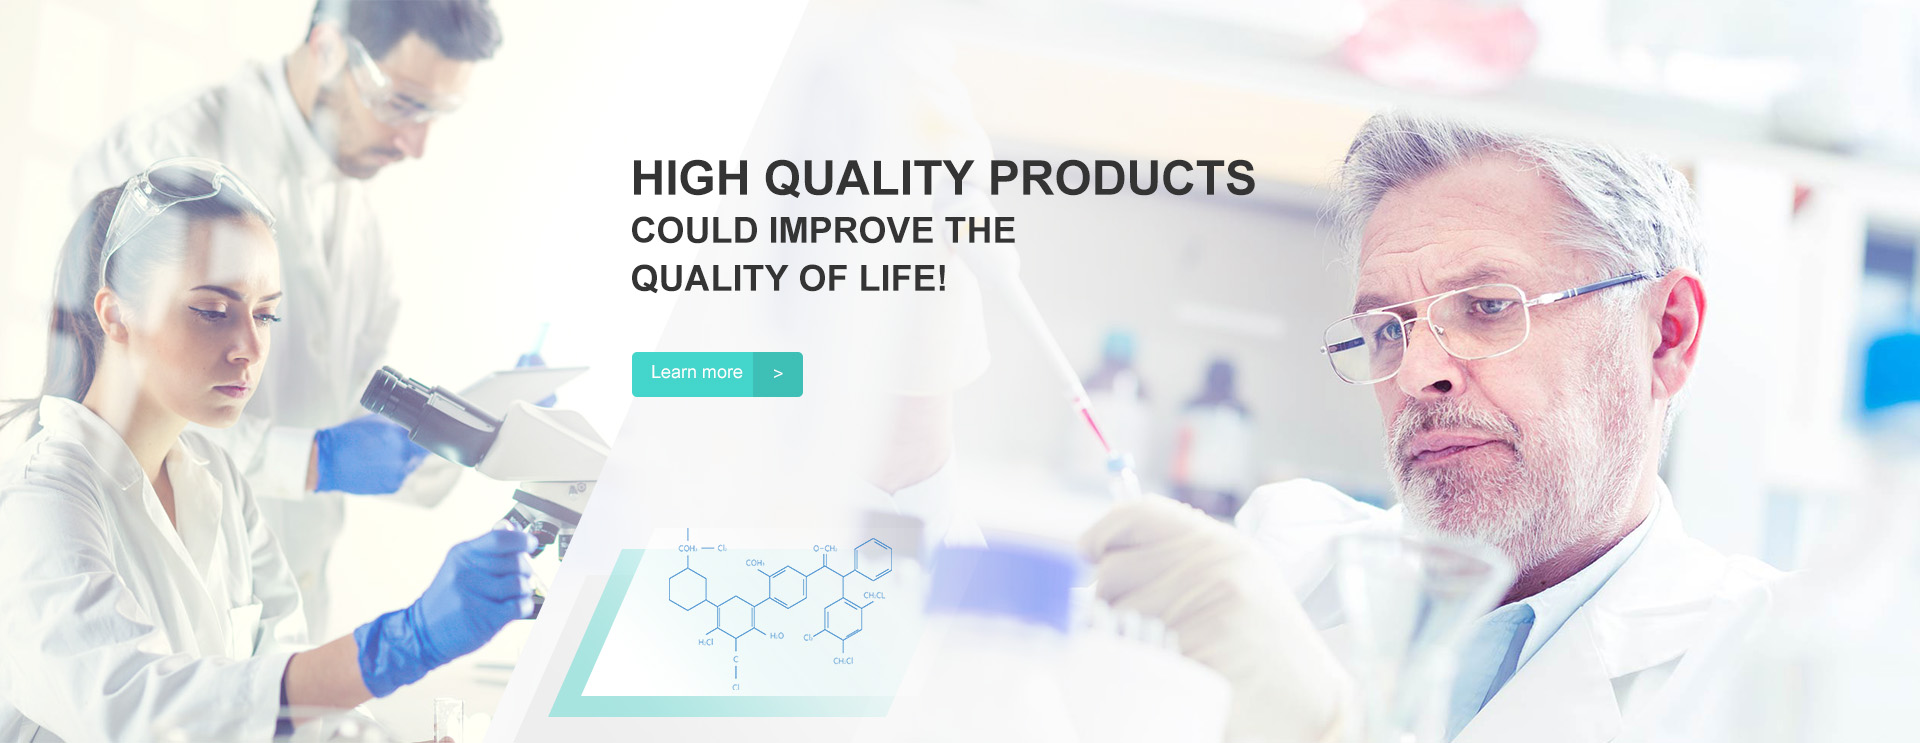 HIGH QUALITY PRODUCTS COULD IMPROVE THE QUALITY OF LIFE!